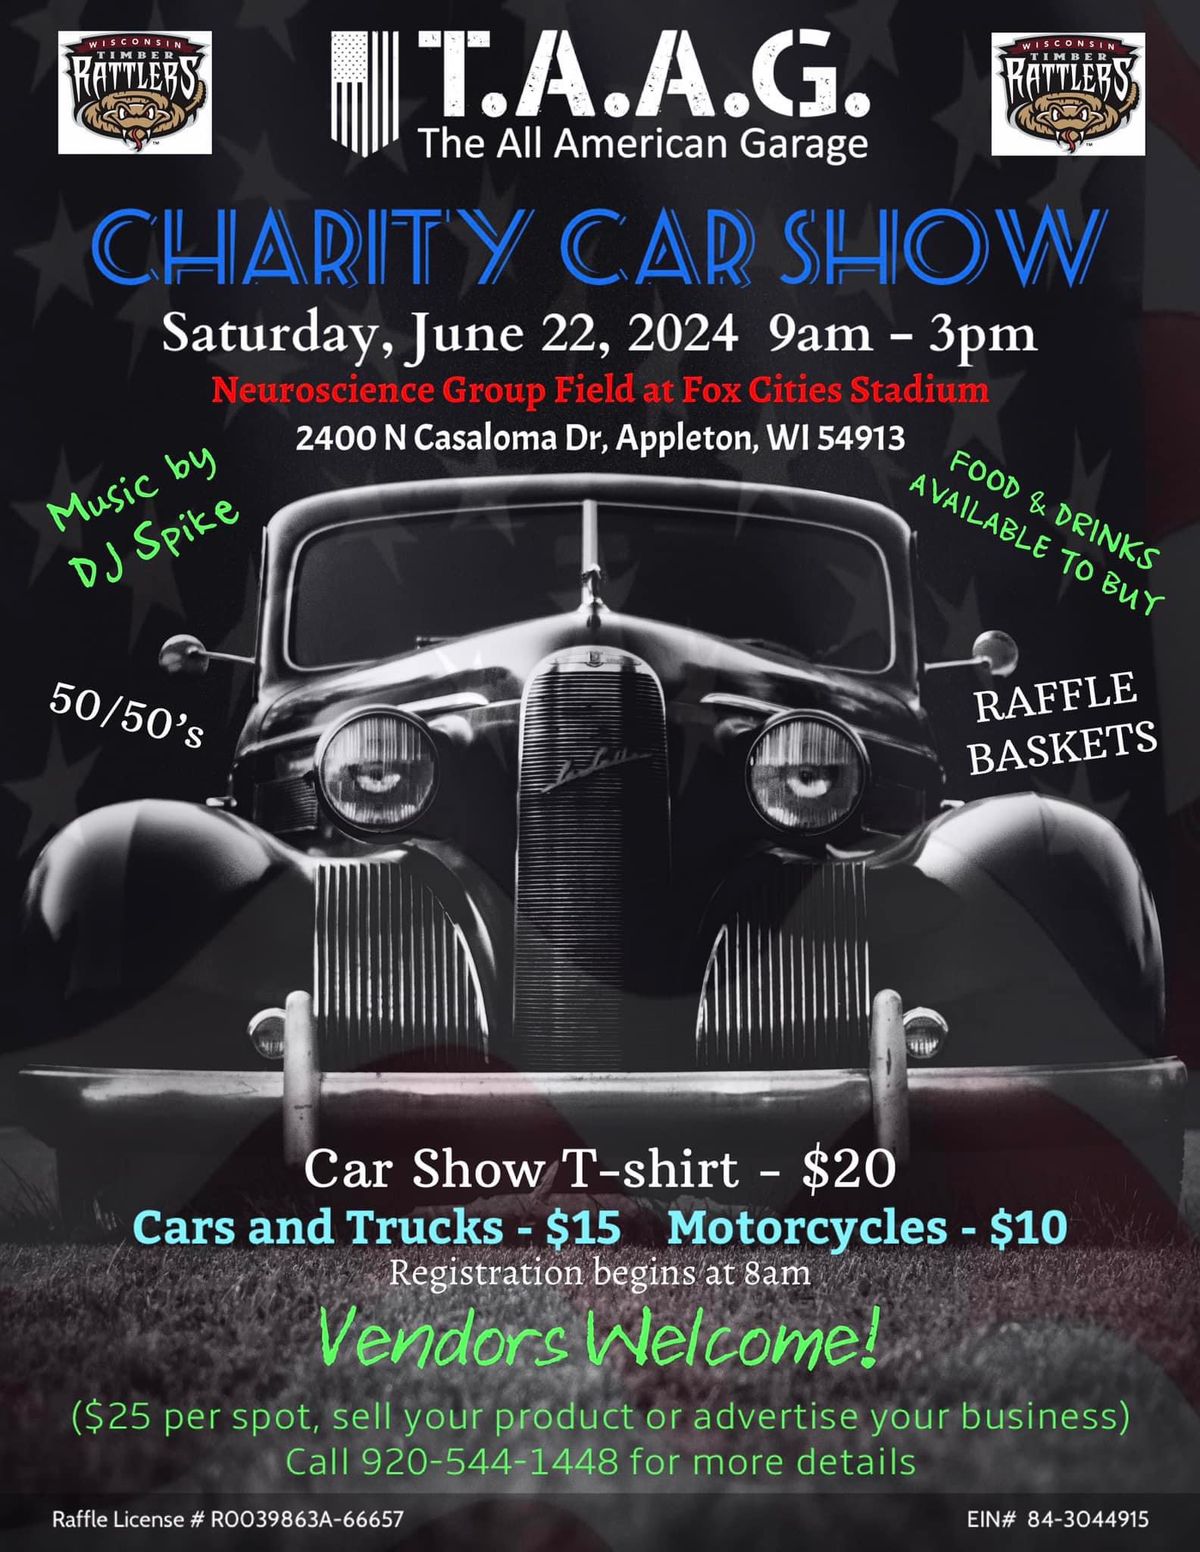 The All American Garage Charity Car Show 